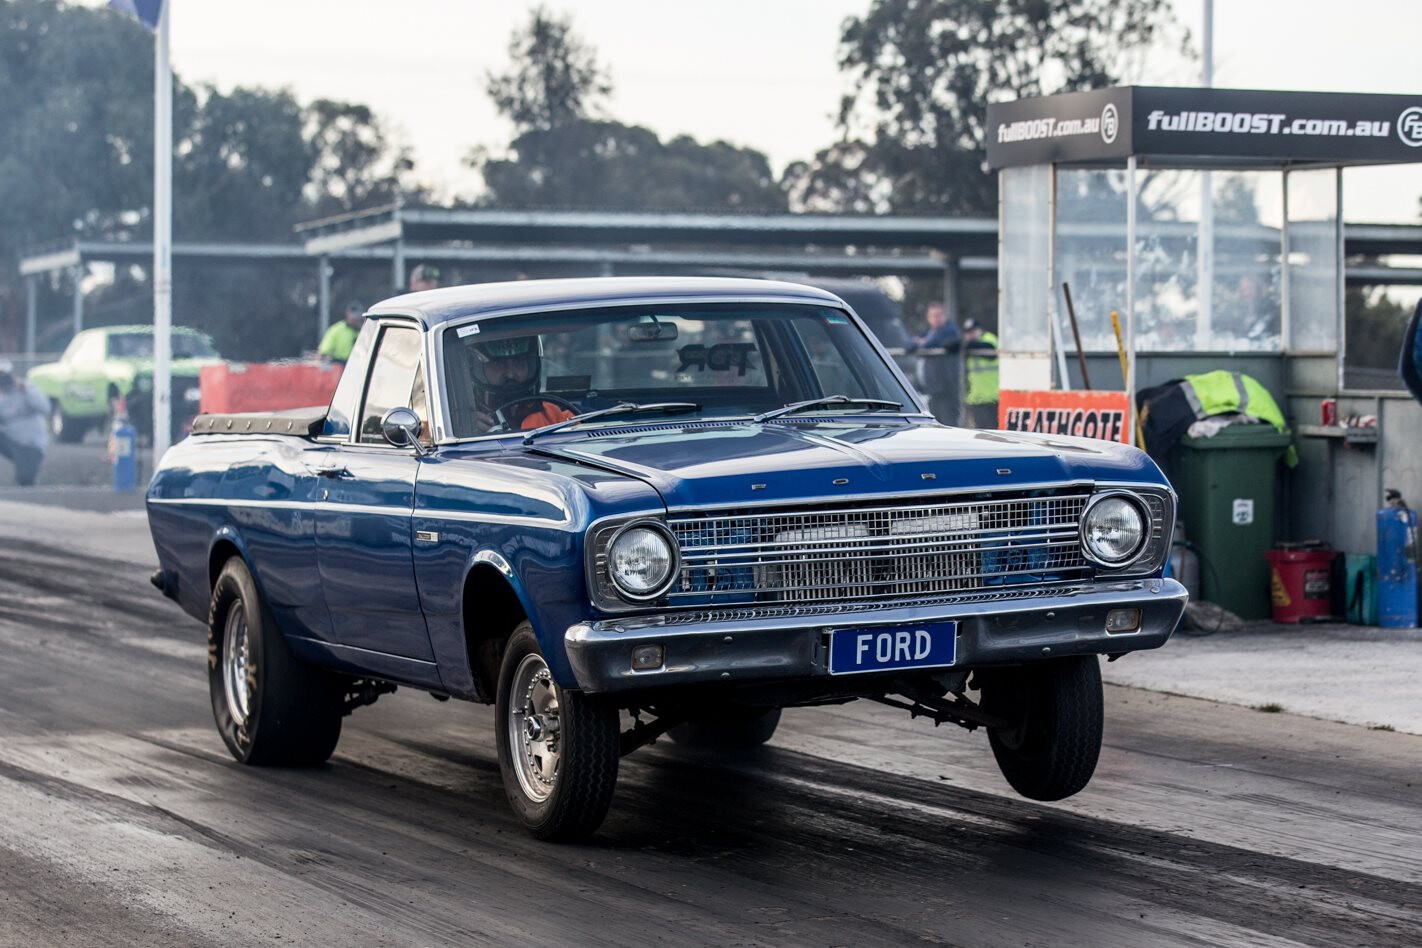 10-SECOND XR FALCON UTE WITH TWIN REAR-MOUNT TURBOS – VIDEO